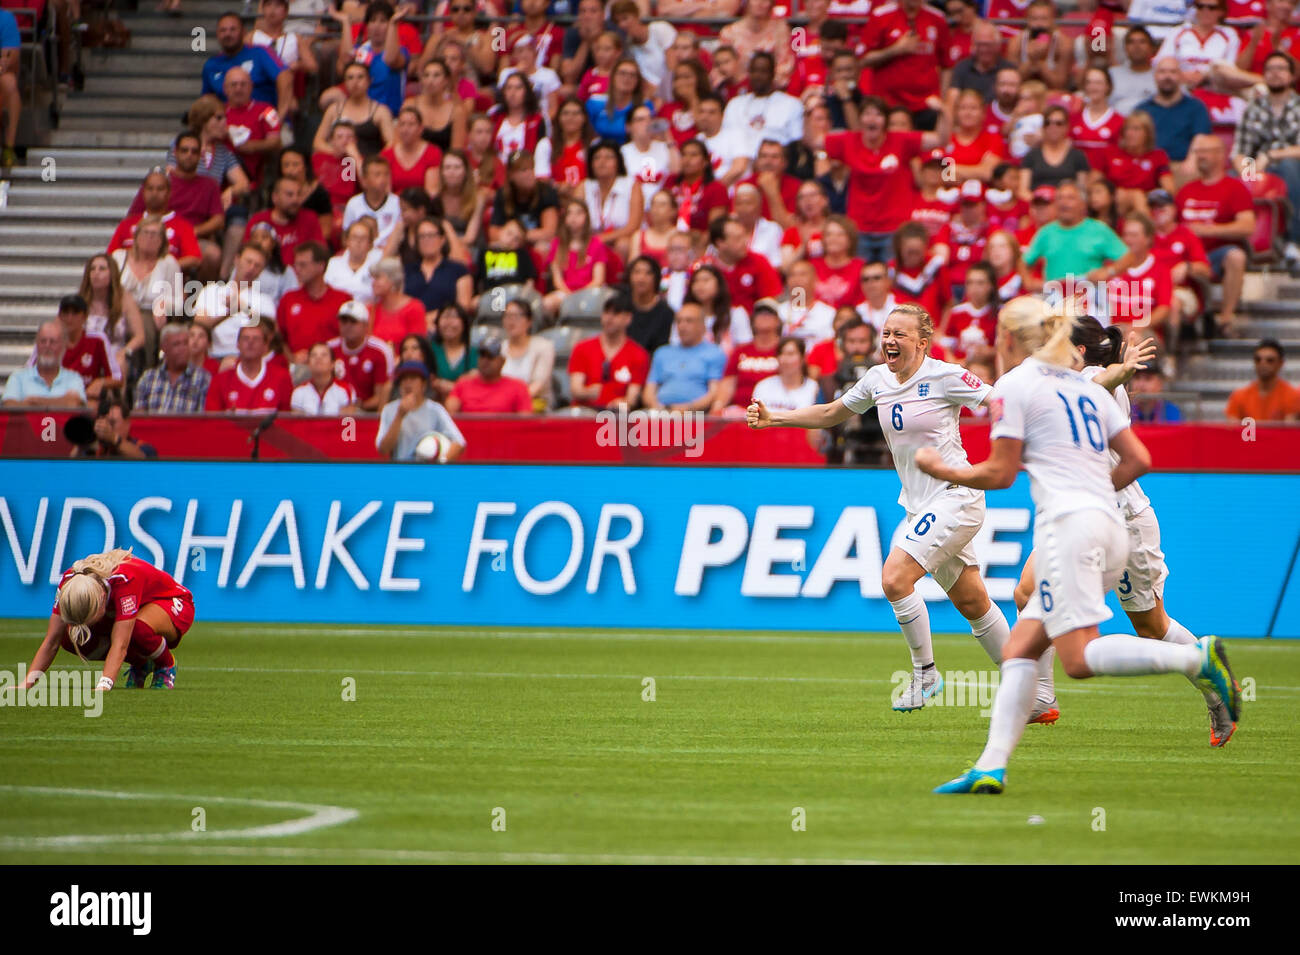 Vancouver, Canada. 27th June, 2015. England players celebrate and Canadian players react following the quarterfinal match between Canada and England at the FIFA Women's World Cup Canada 2015 at BC Place Stadium. England won the match 2-1. Credit:  Matt Jacques/Alamy Live News Stock Photo